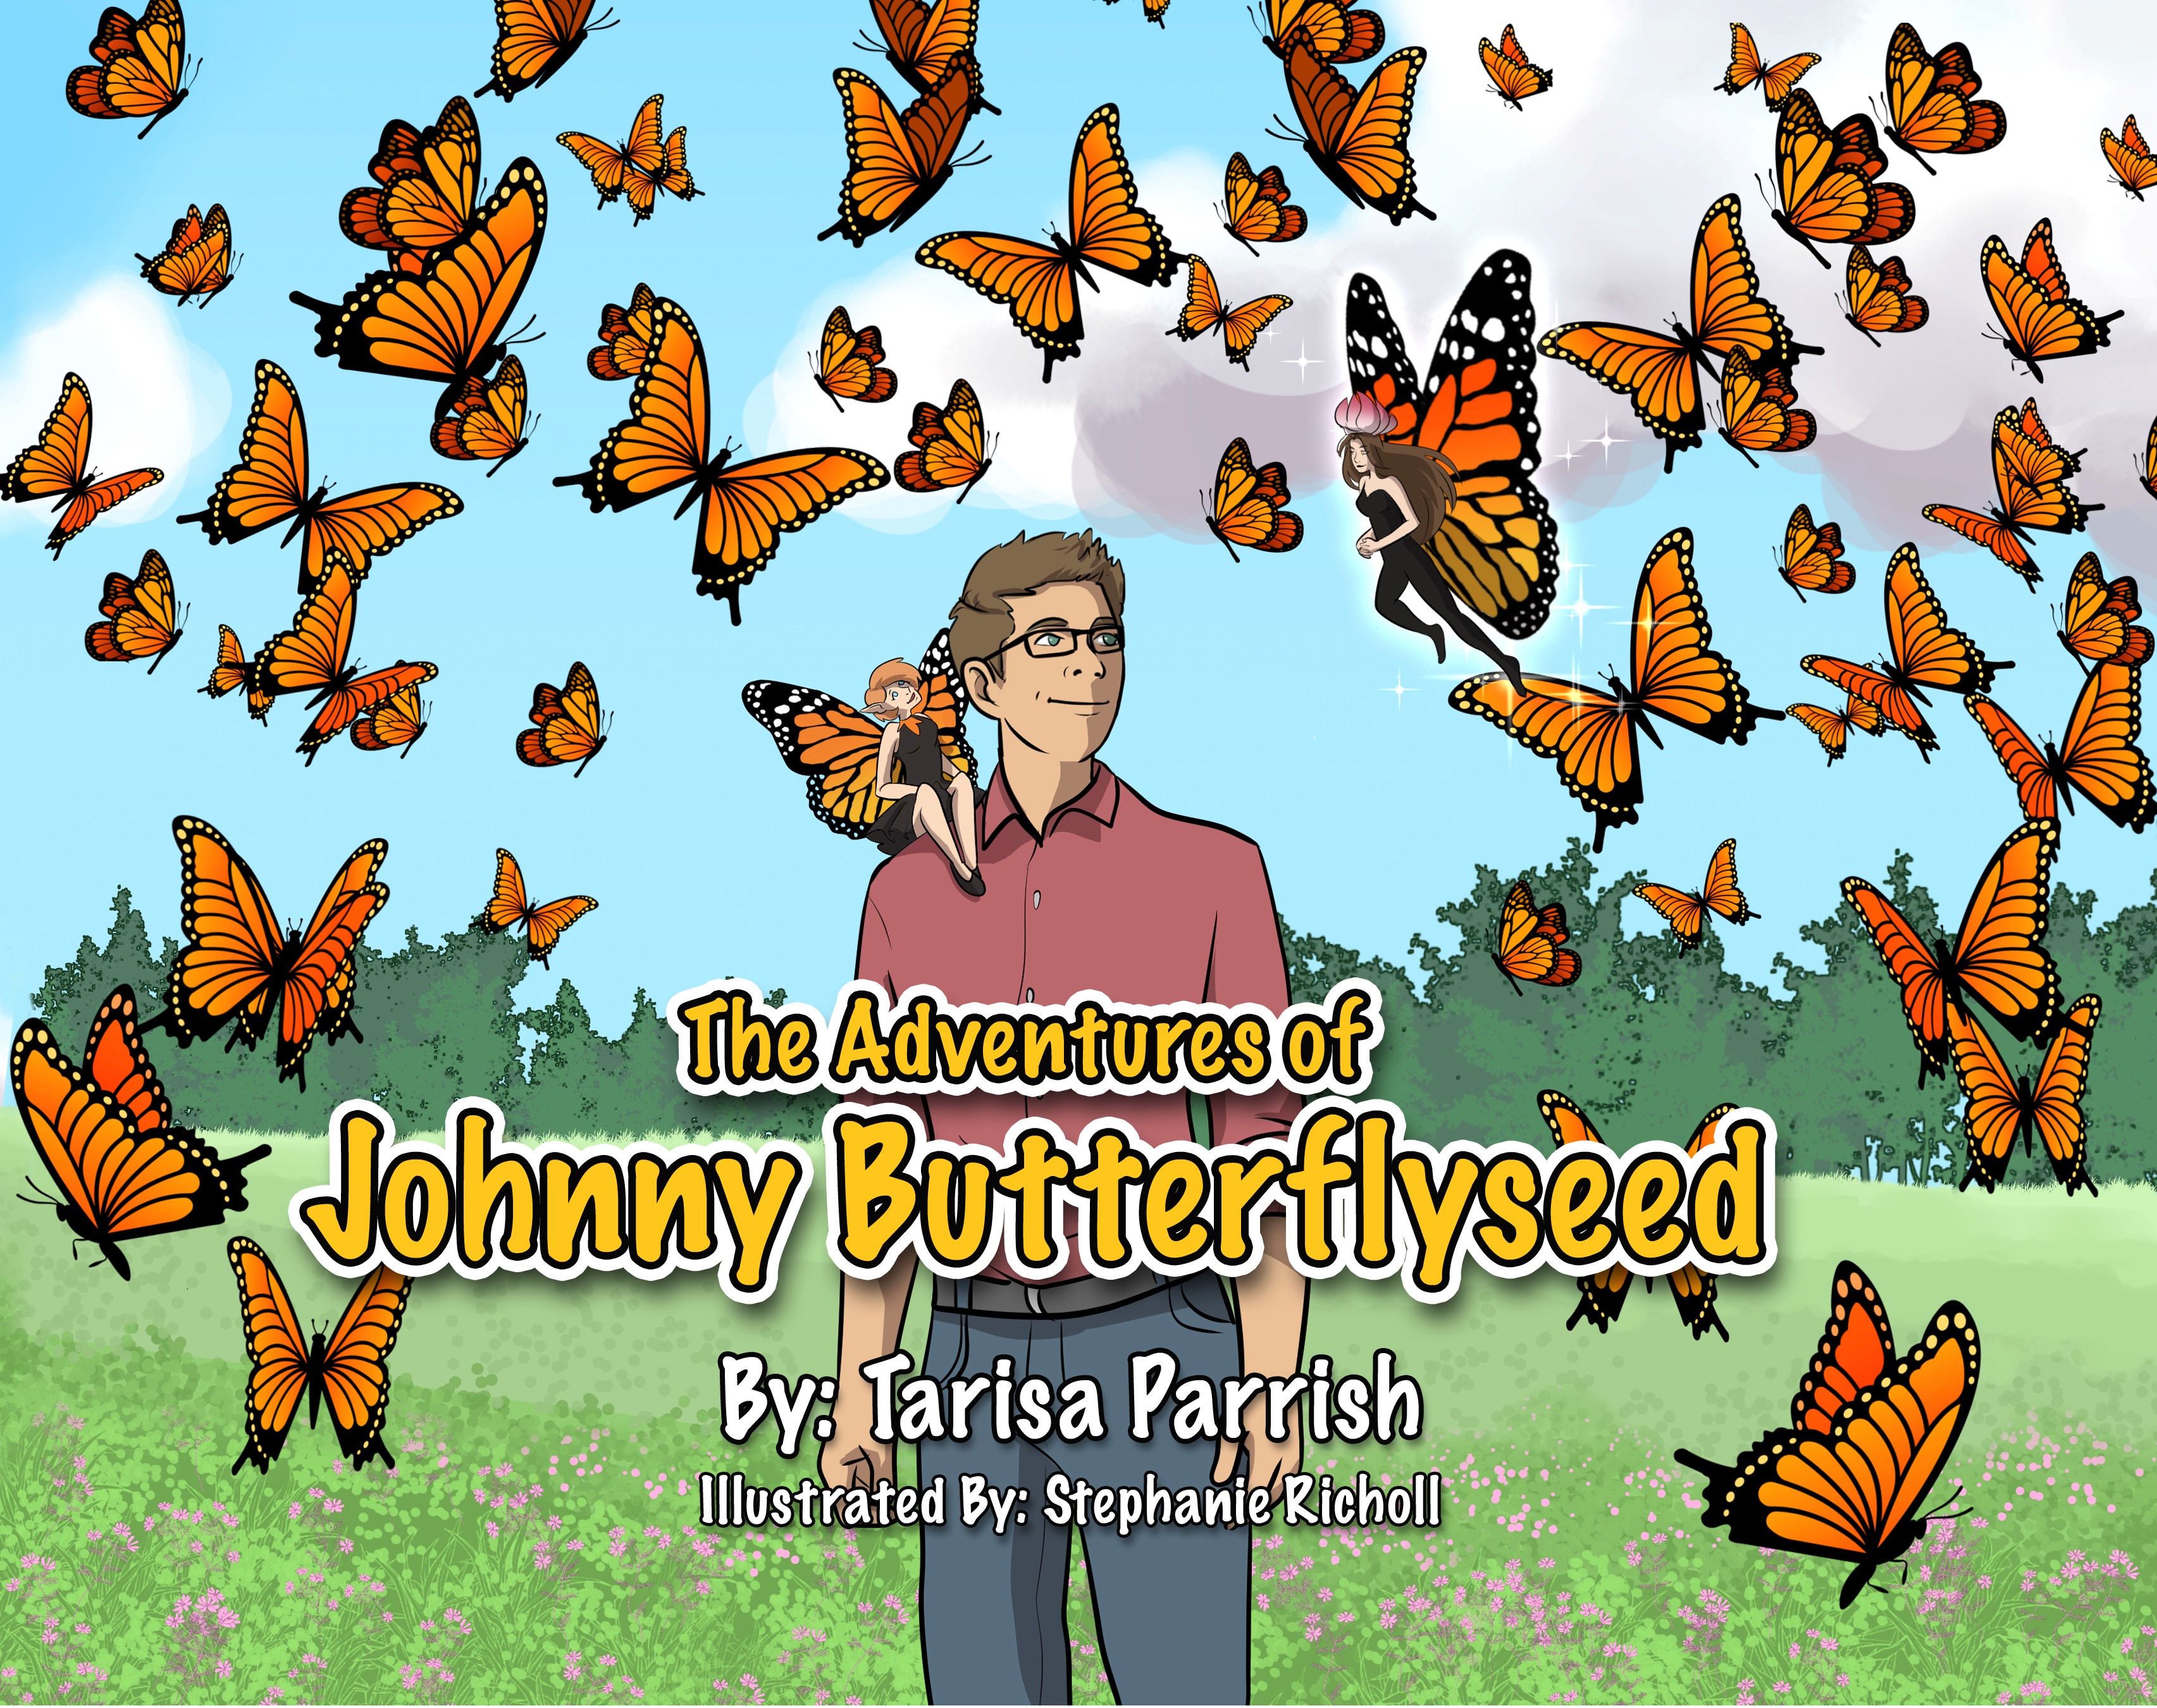 Tarisa Parrish Inspires Kids to Save the Monarch Butterfly